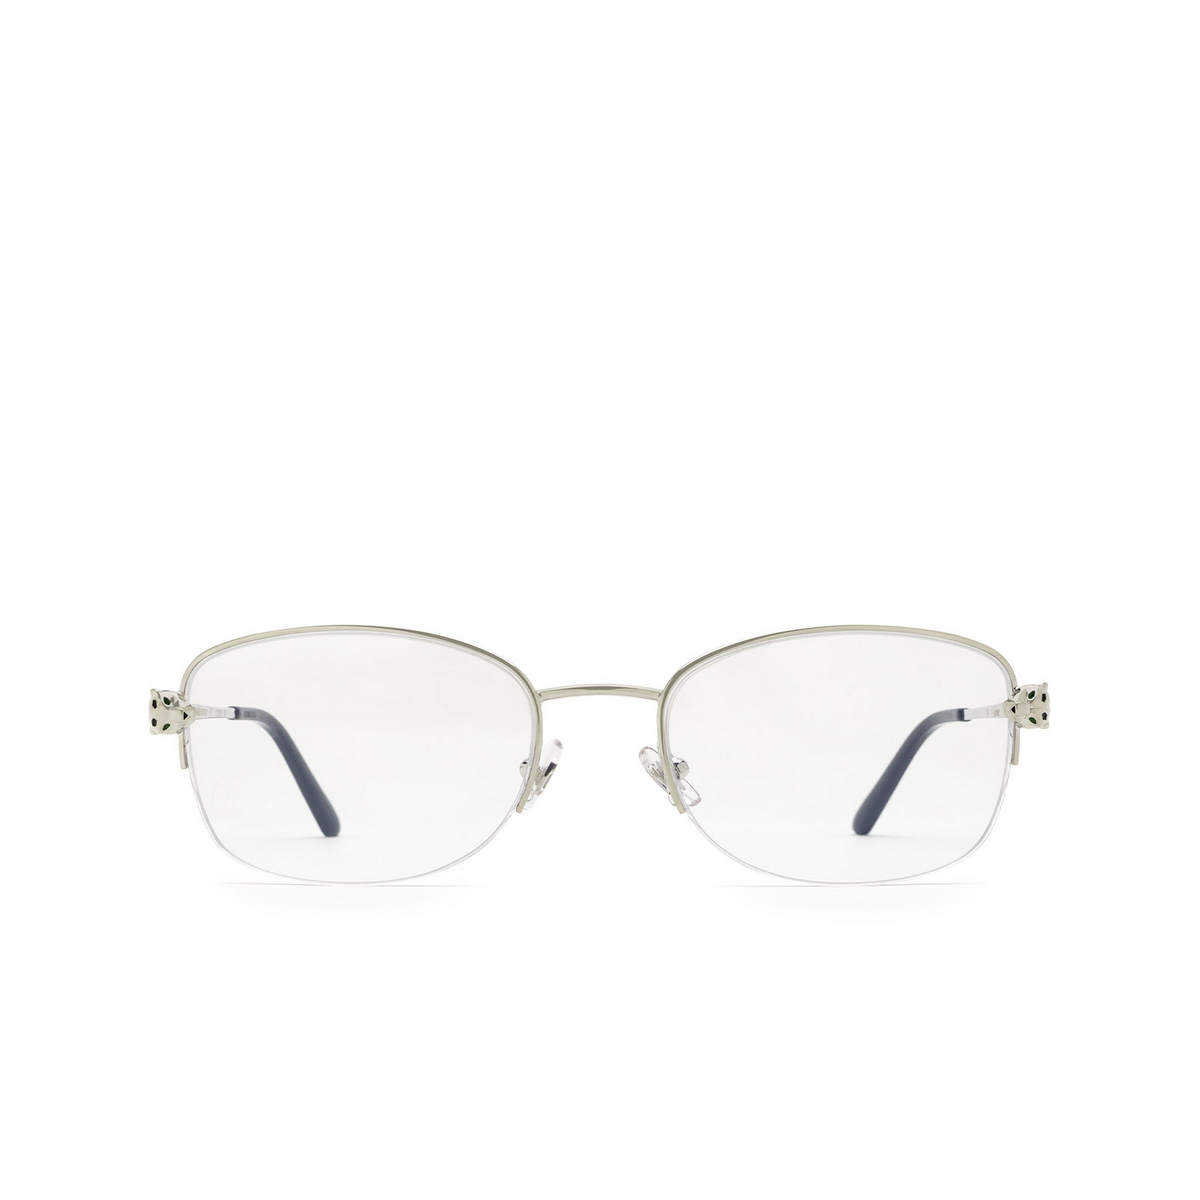 Cartier® Rectangle Eyeglasses: CT0235O color 002 Silver - front view